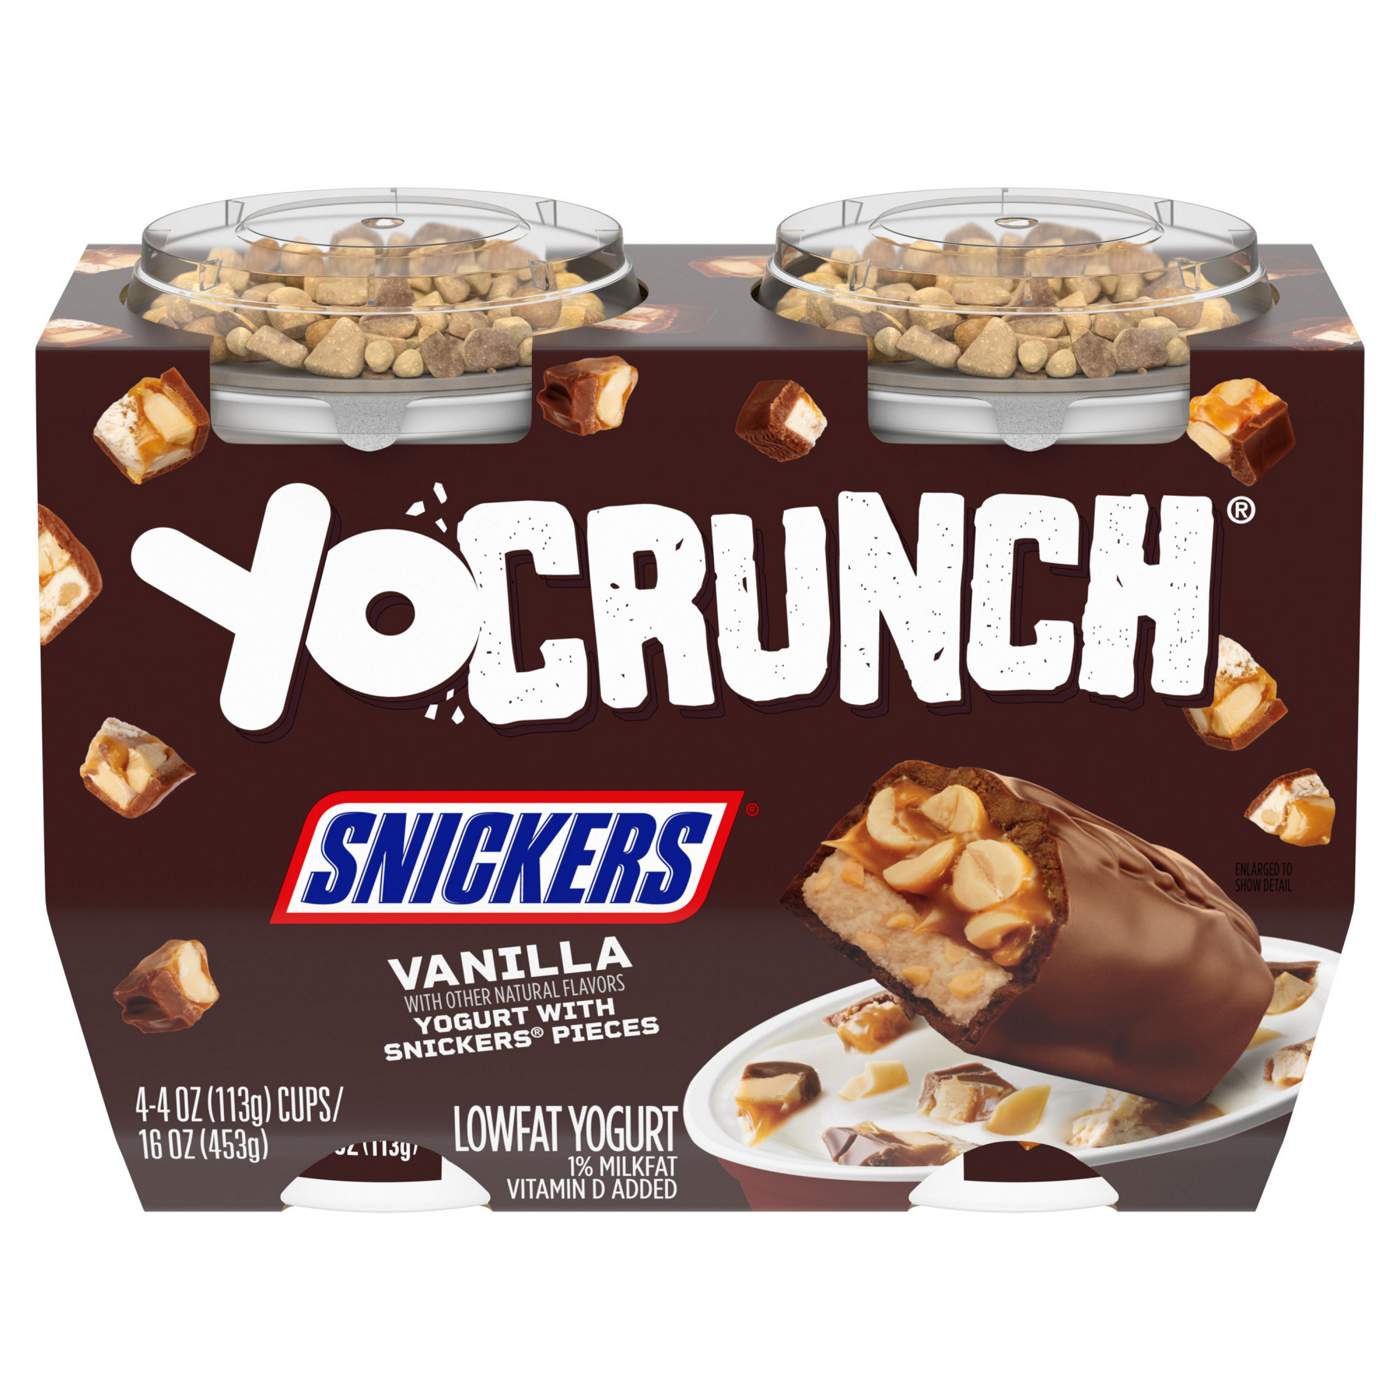 YoCrunch Low-Fat Vanilla with Snickers Yogurt; image 9 of 9